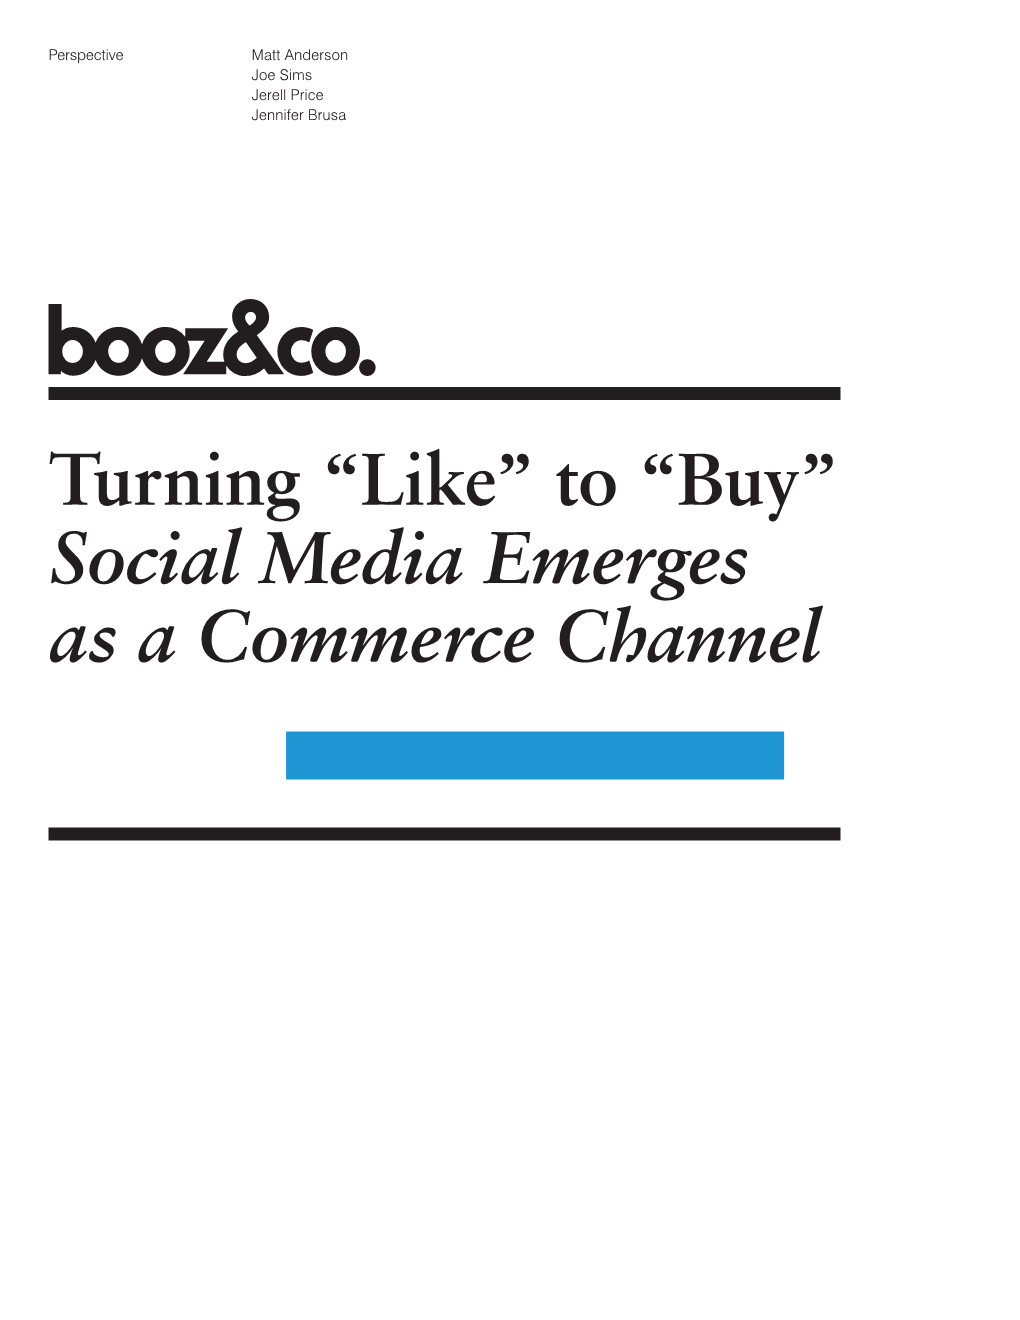 Turning “Like” to “Buy” Social Media Emerges As a Commerce Channel Contact Information